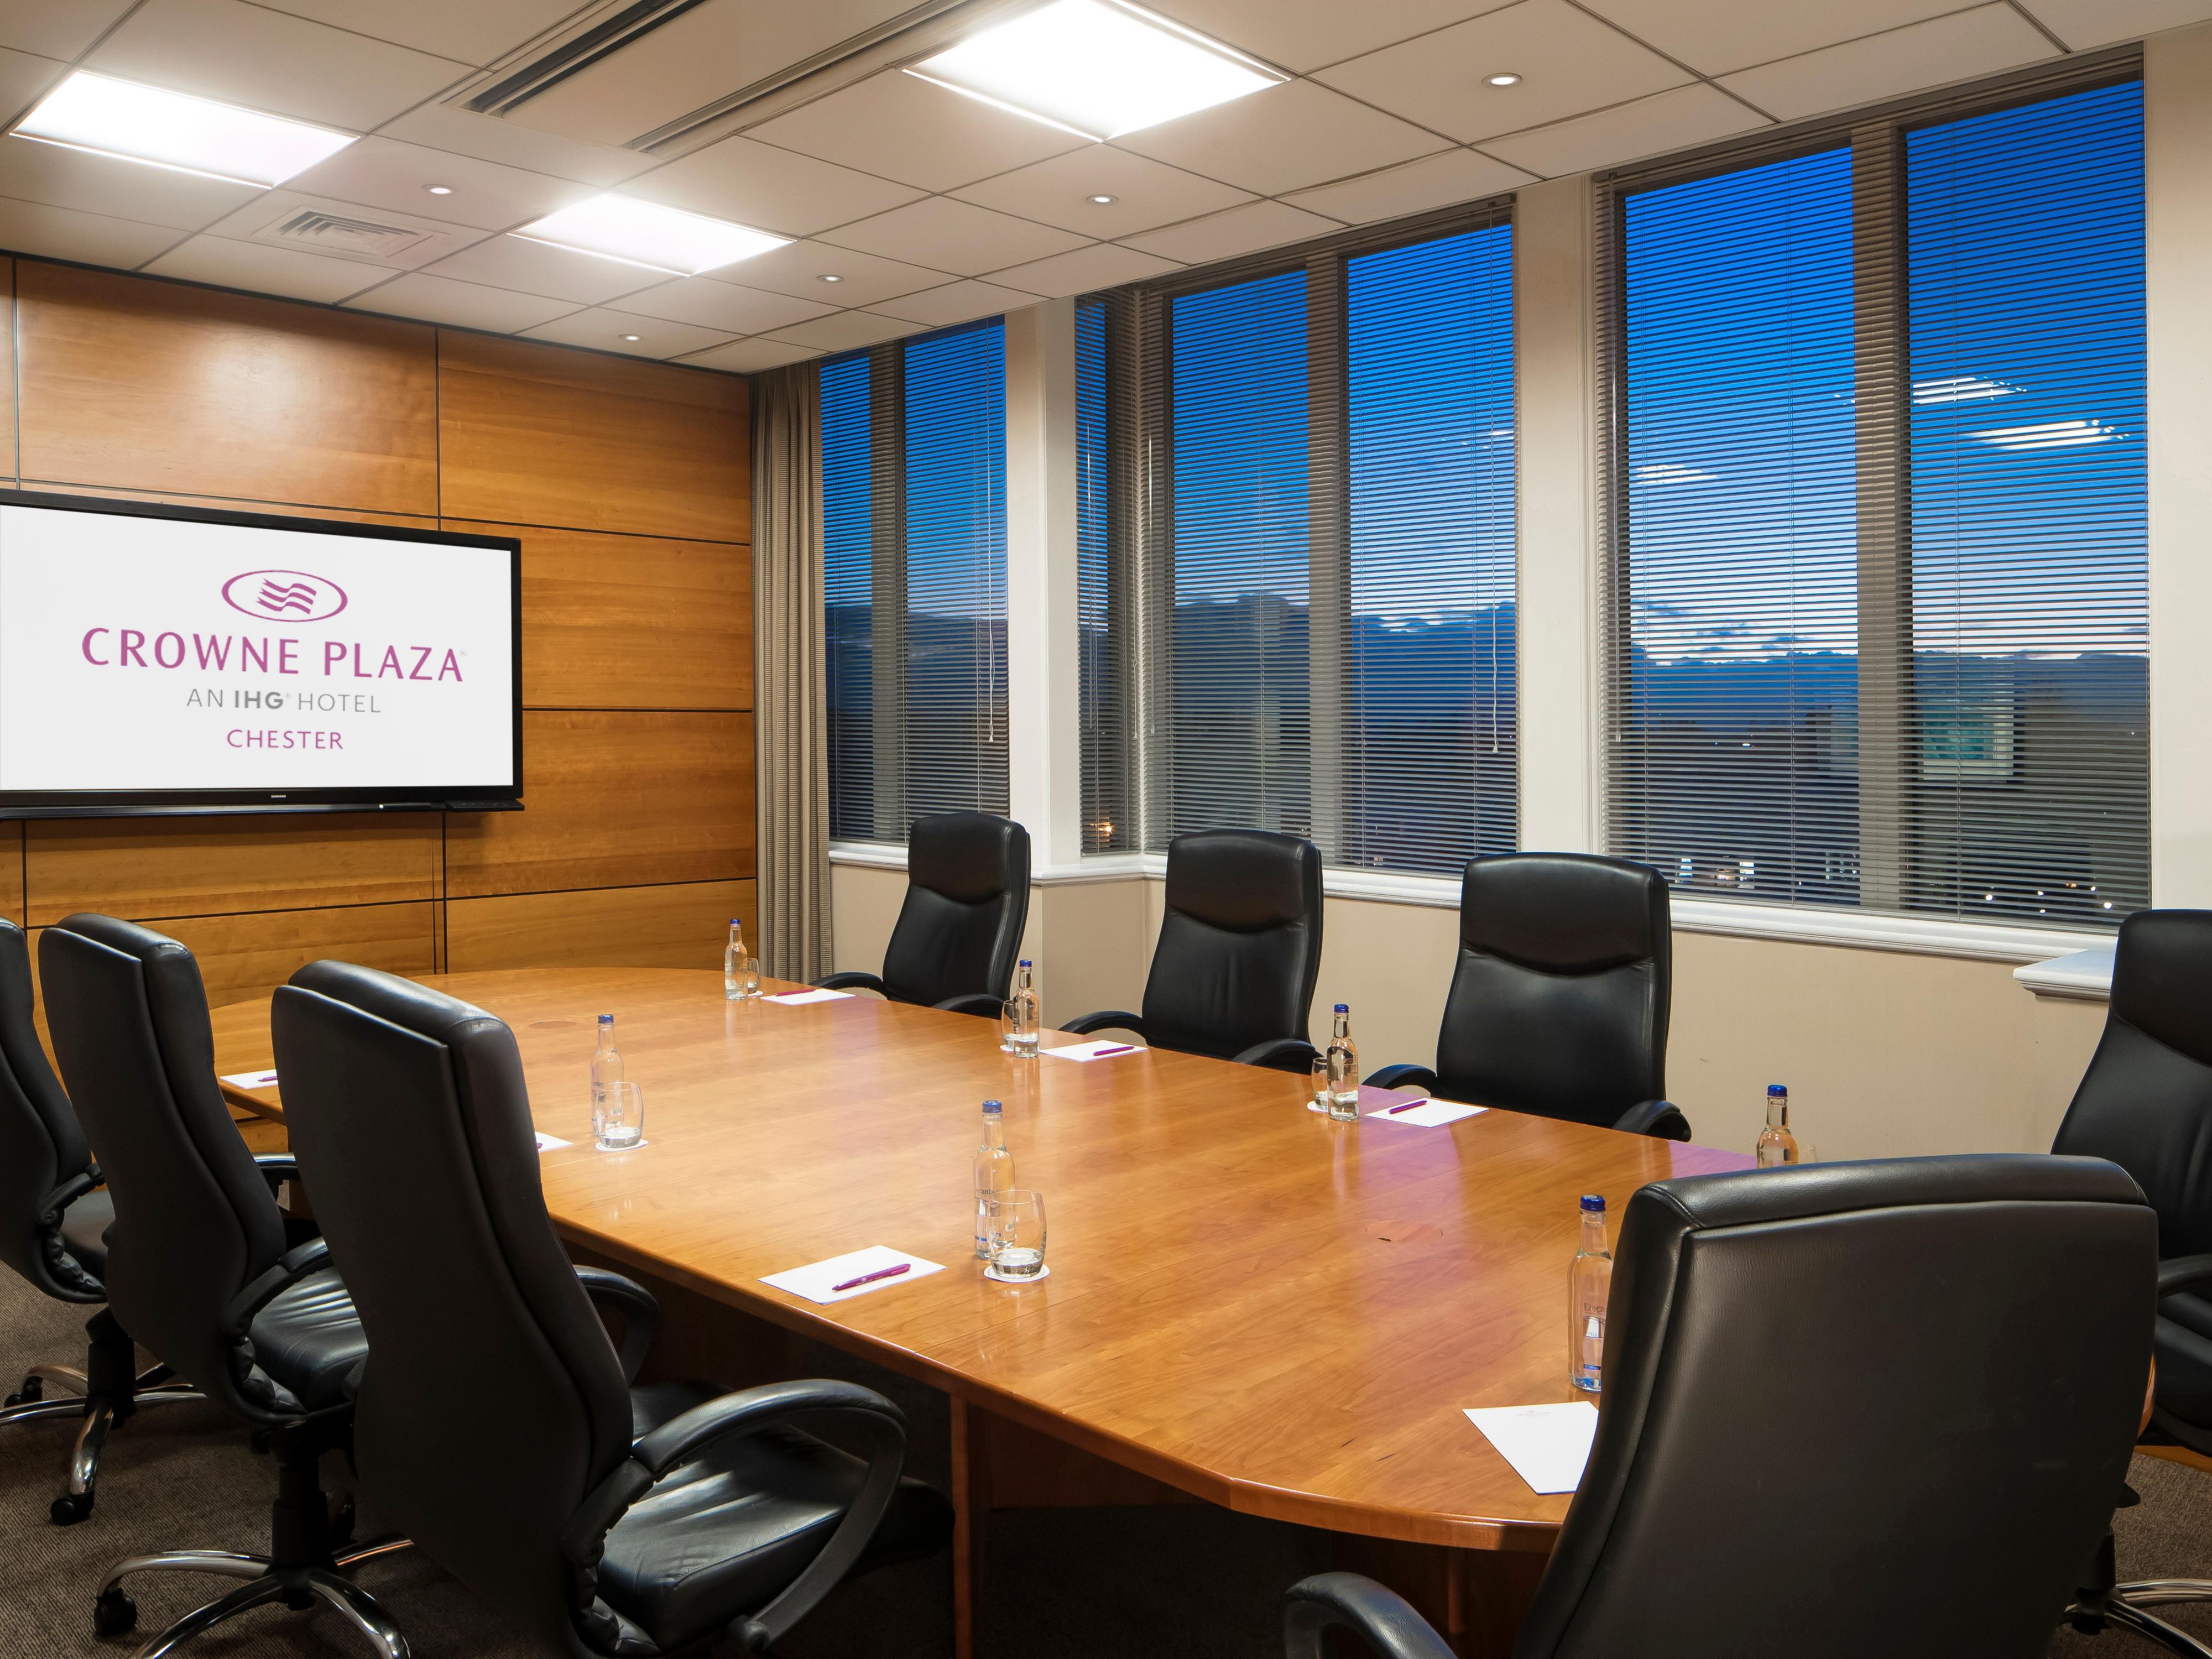 Get the most out of your meeting or event when you book at the Crowne Plaza Chester. Our Meetings and More Package, offers Complimentary Crowne Plaza unique experiences, 20% off when you extend your stay, a complimentary guest room, IHG Business Rewards applies to Day Delegate Package for 10+ guests.